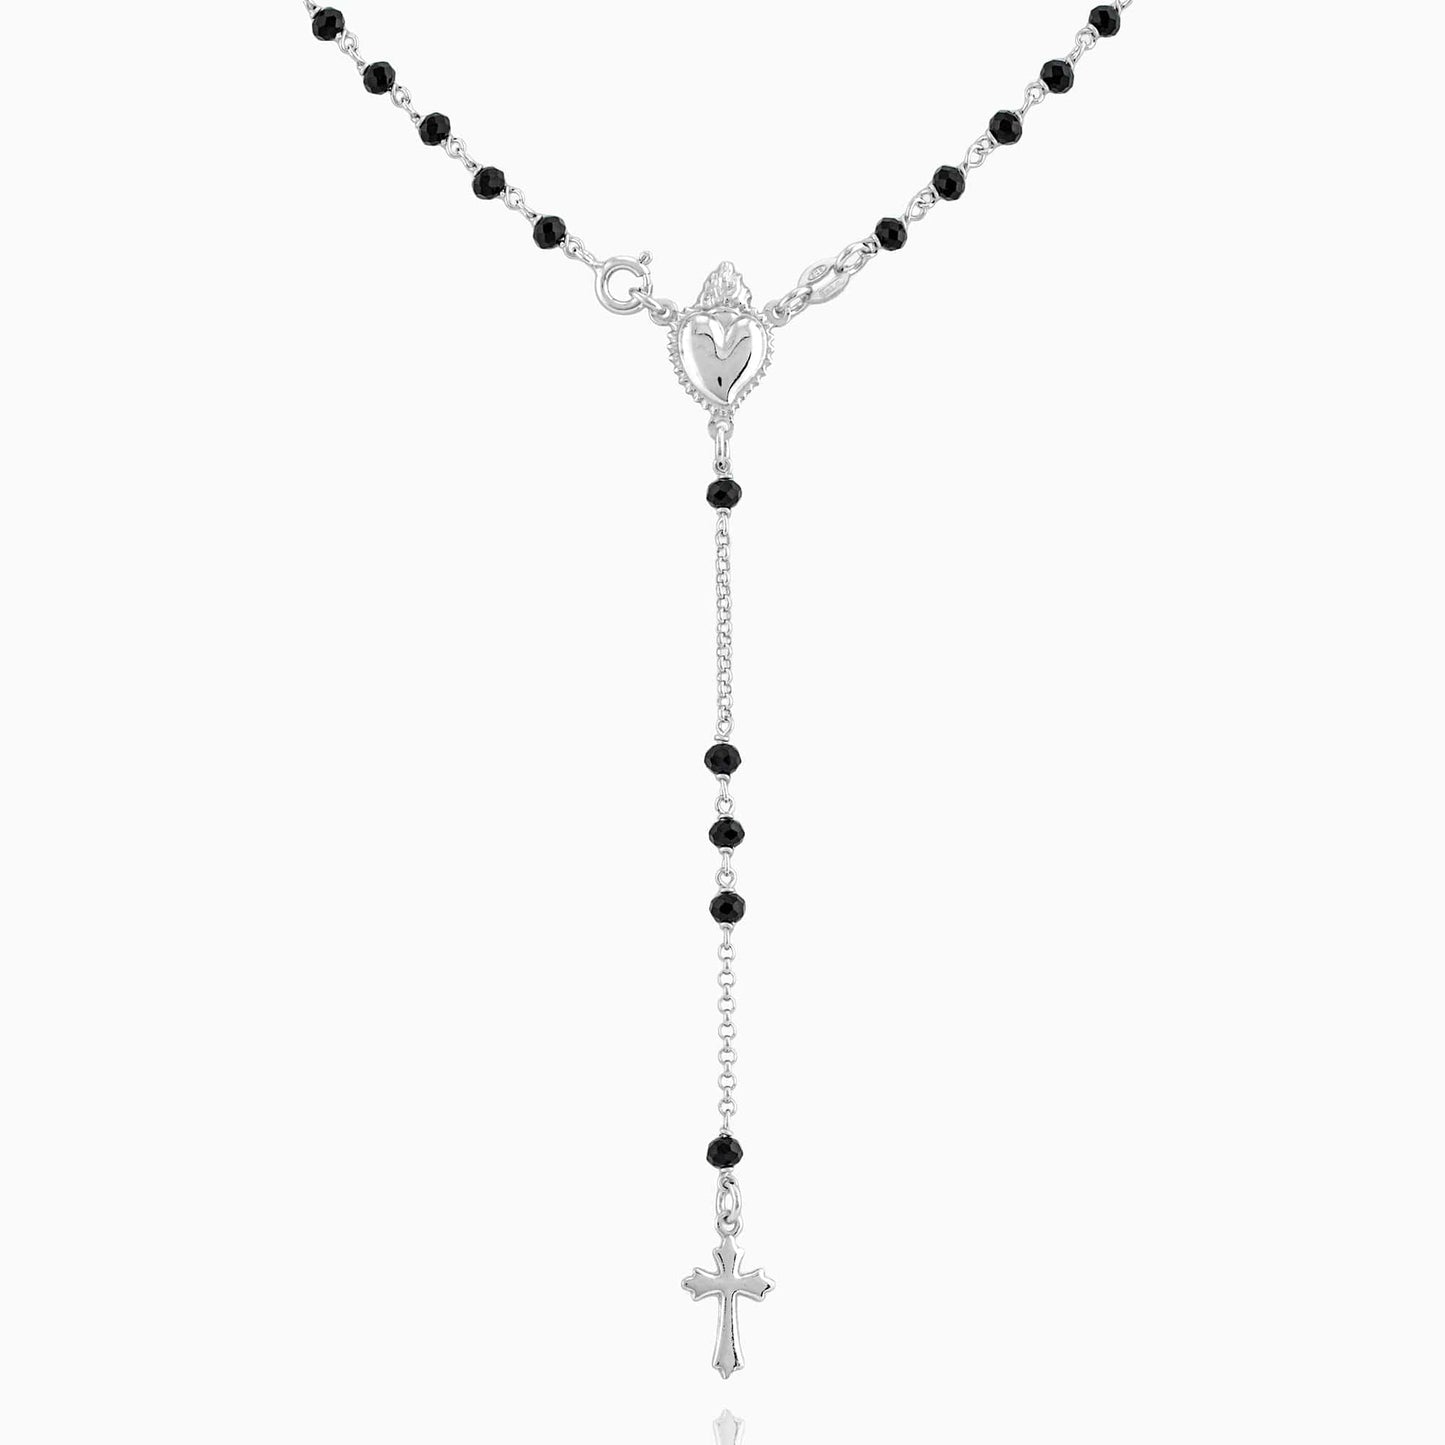 MONDO CATTOLICO Prayer Beads Rhodium / Cm 46 (18.1 in) Sterling Silver Rosary Sacred Heart 2mm Black Beads